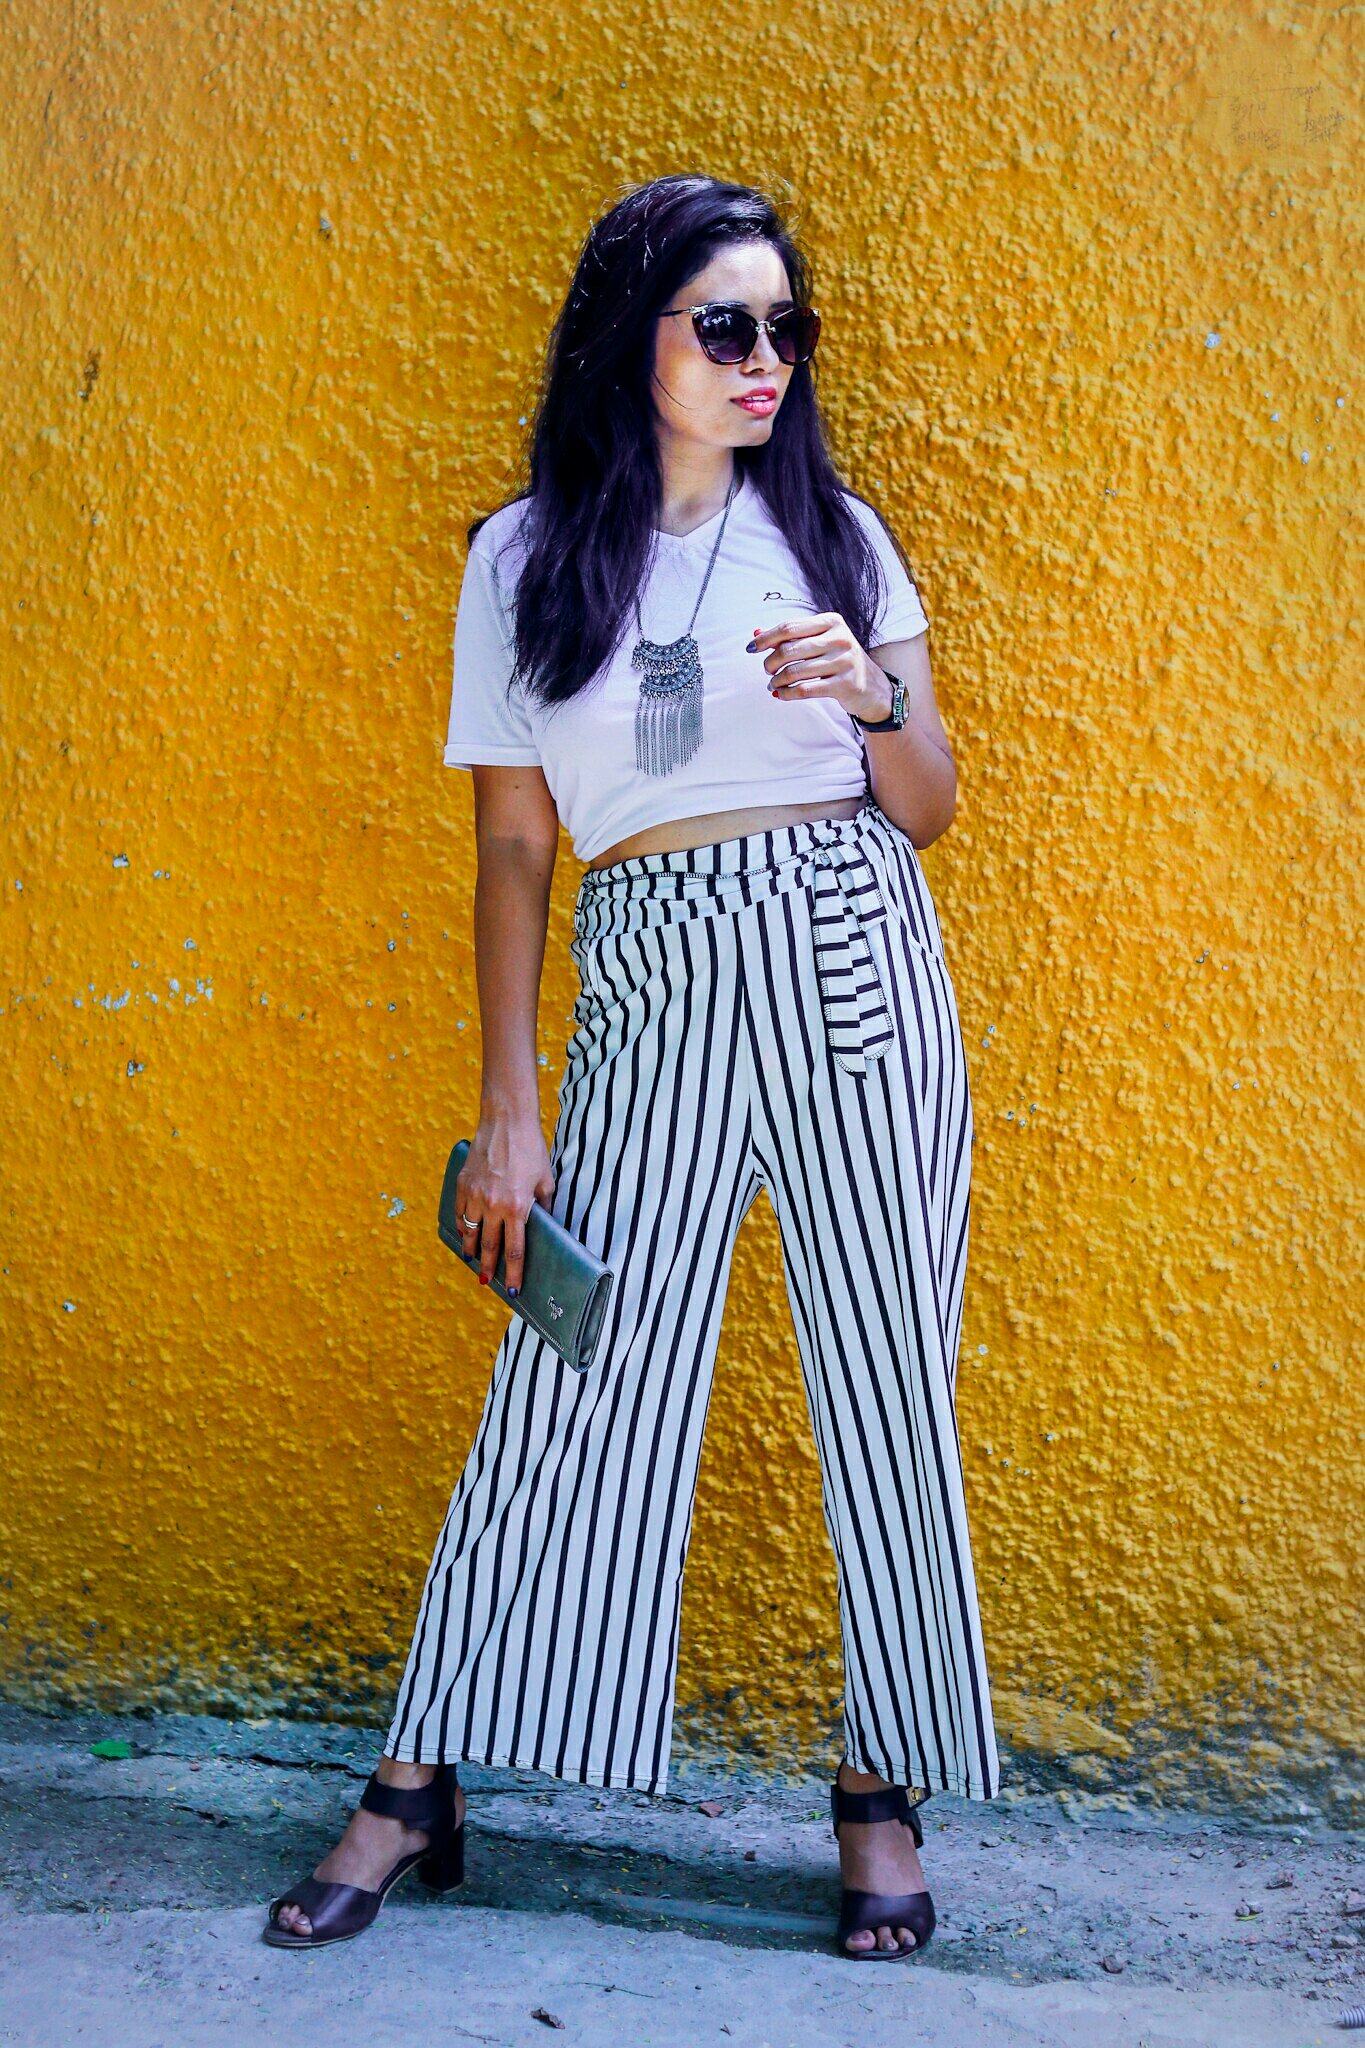 Are culottes and pallazo pants the same? If not, how do they differ? - Quora